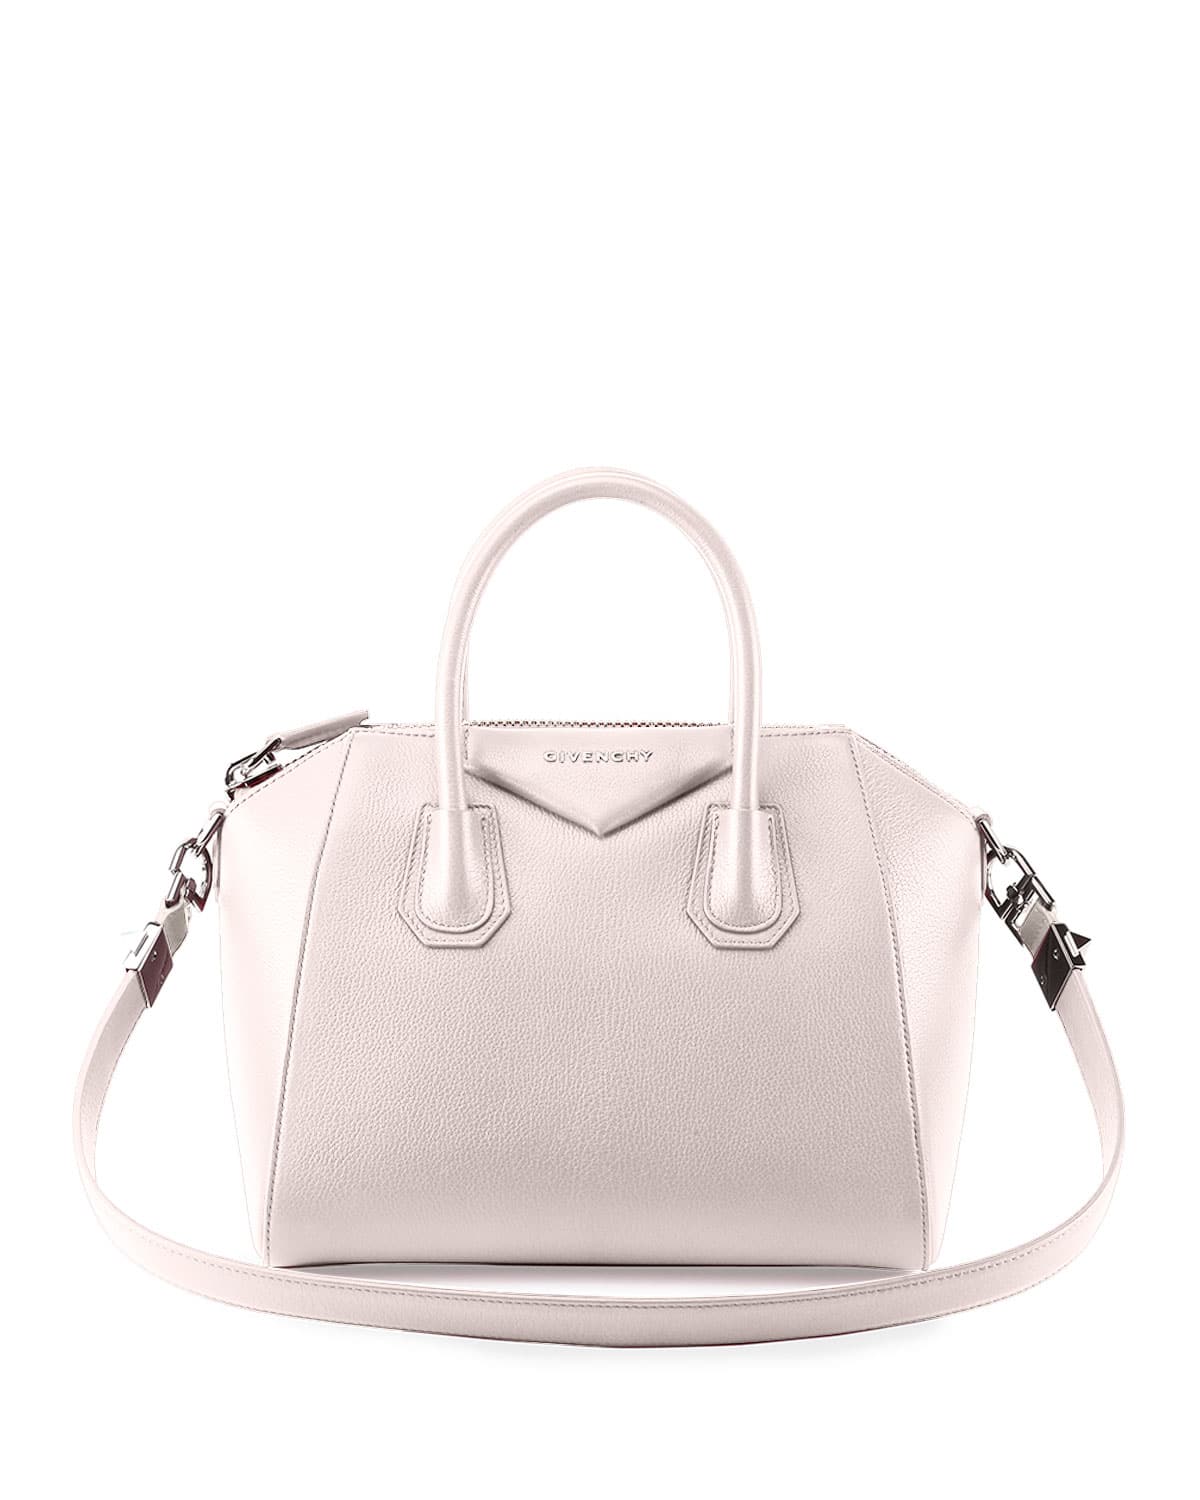 Givenchy Fall/Winter 2015 Bag Collection Featuring Bi-Color Bags 